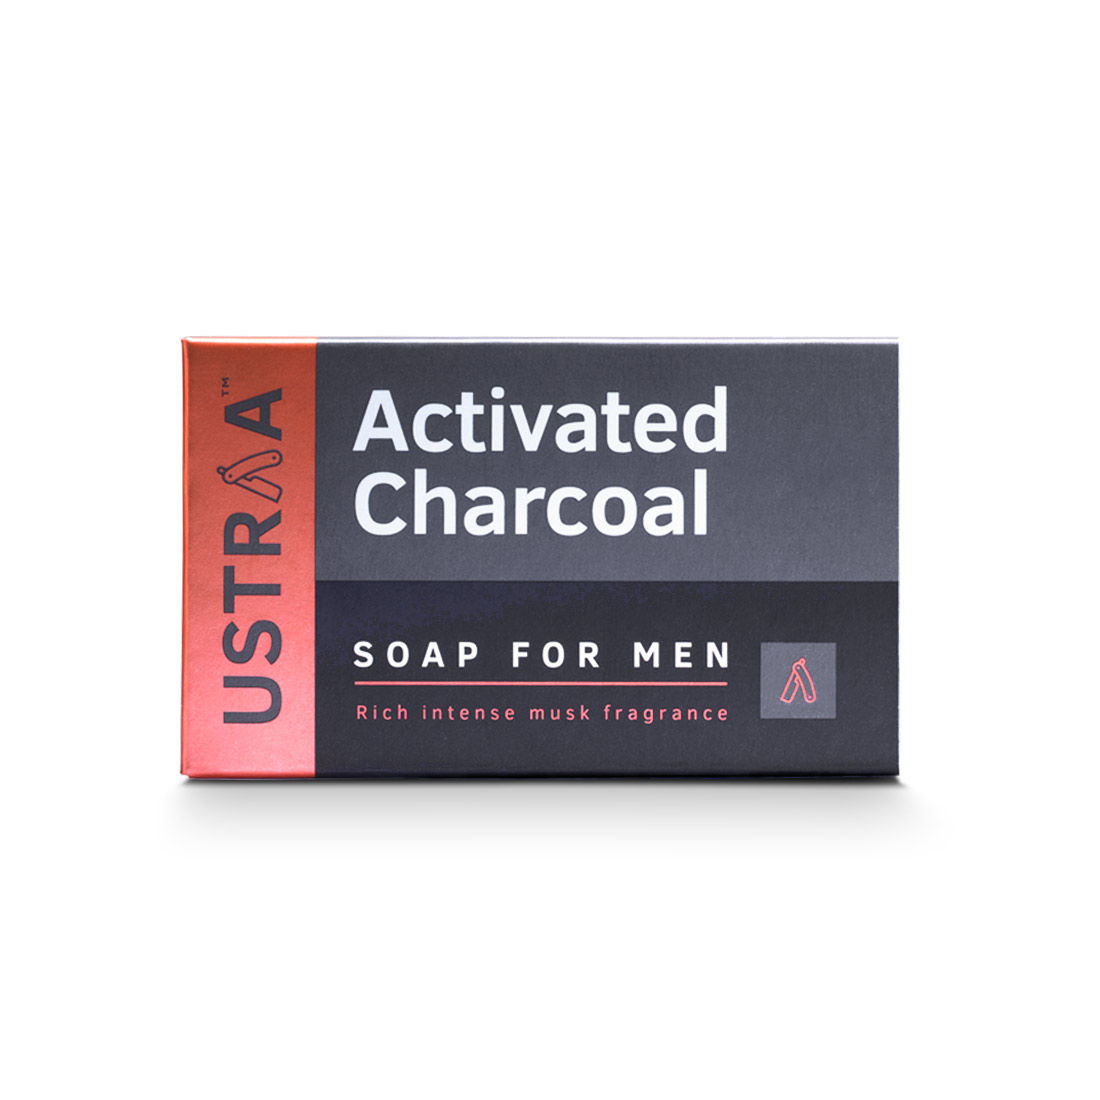 Ustraa Activated Charcoal Soap For Men